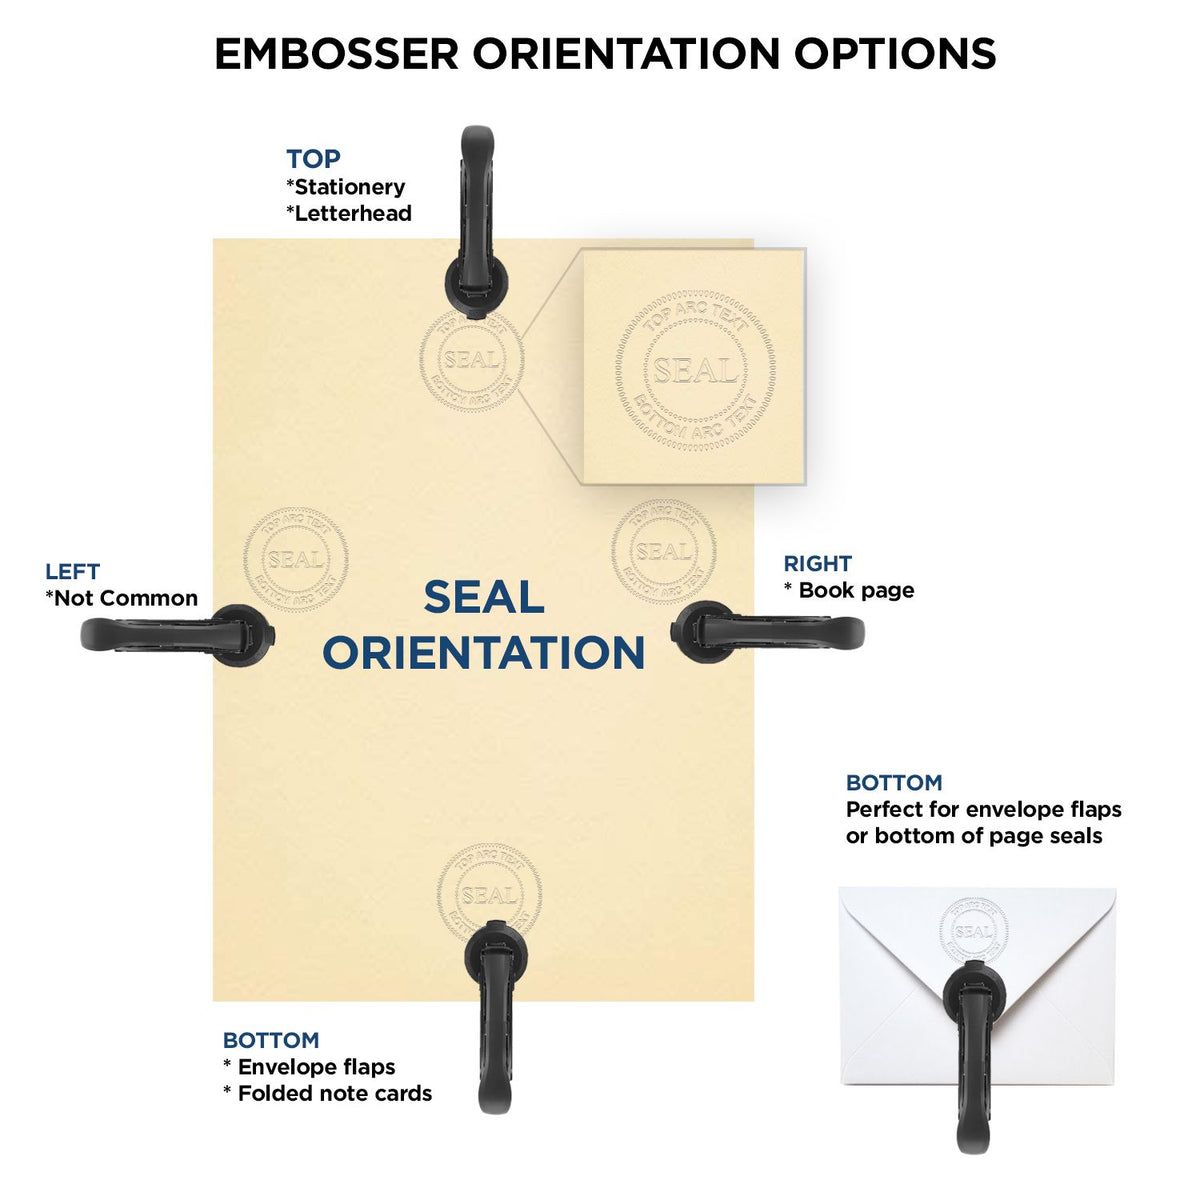 An infographic for the State of Kansas Long Reach Architectural Embossing Seal showing embosser orientation, this is showing examples of a top, bottom, right and left insert.